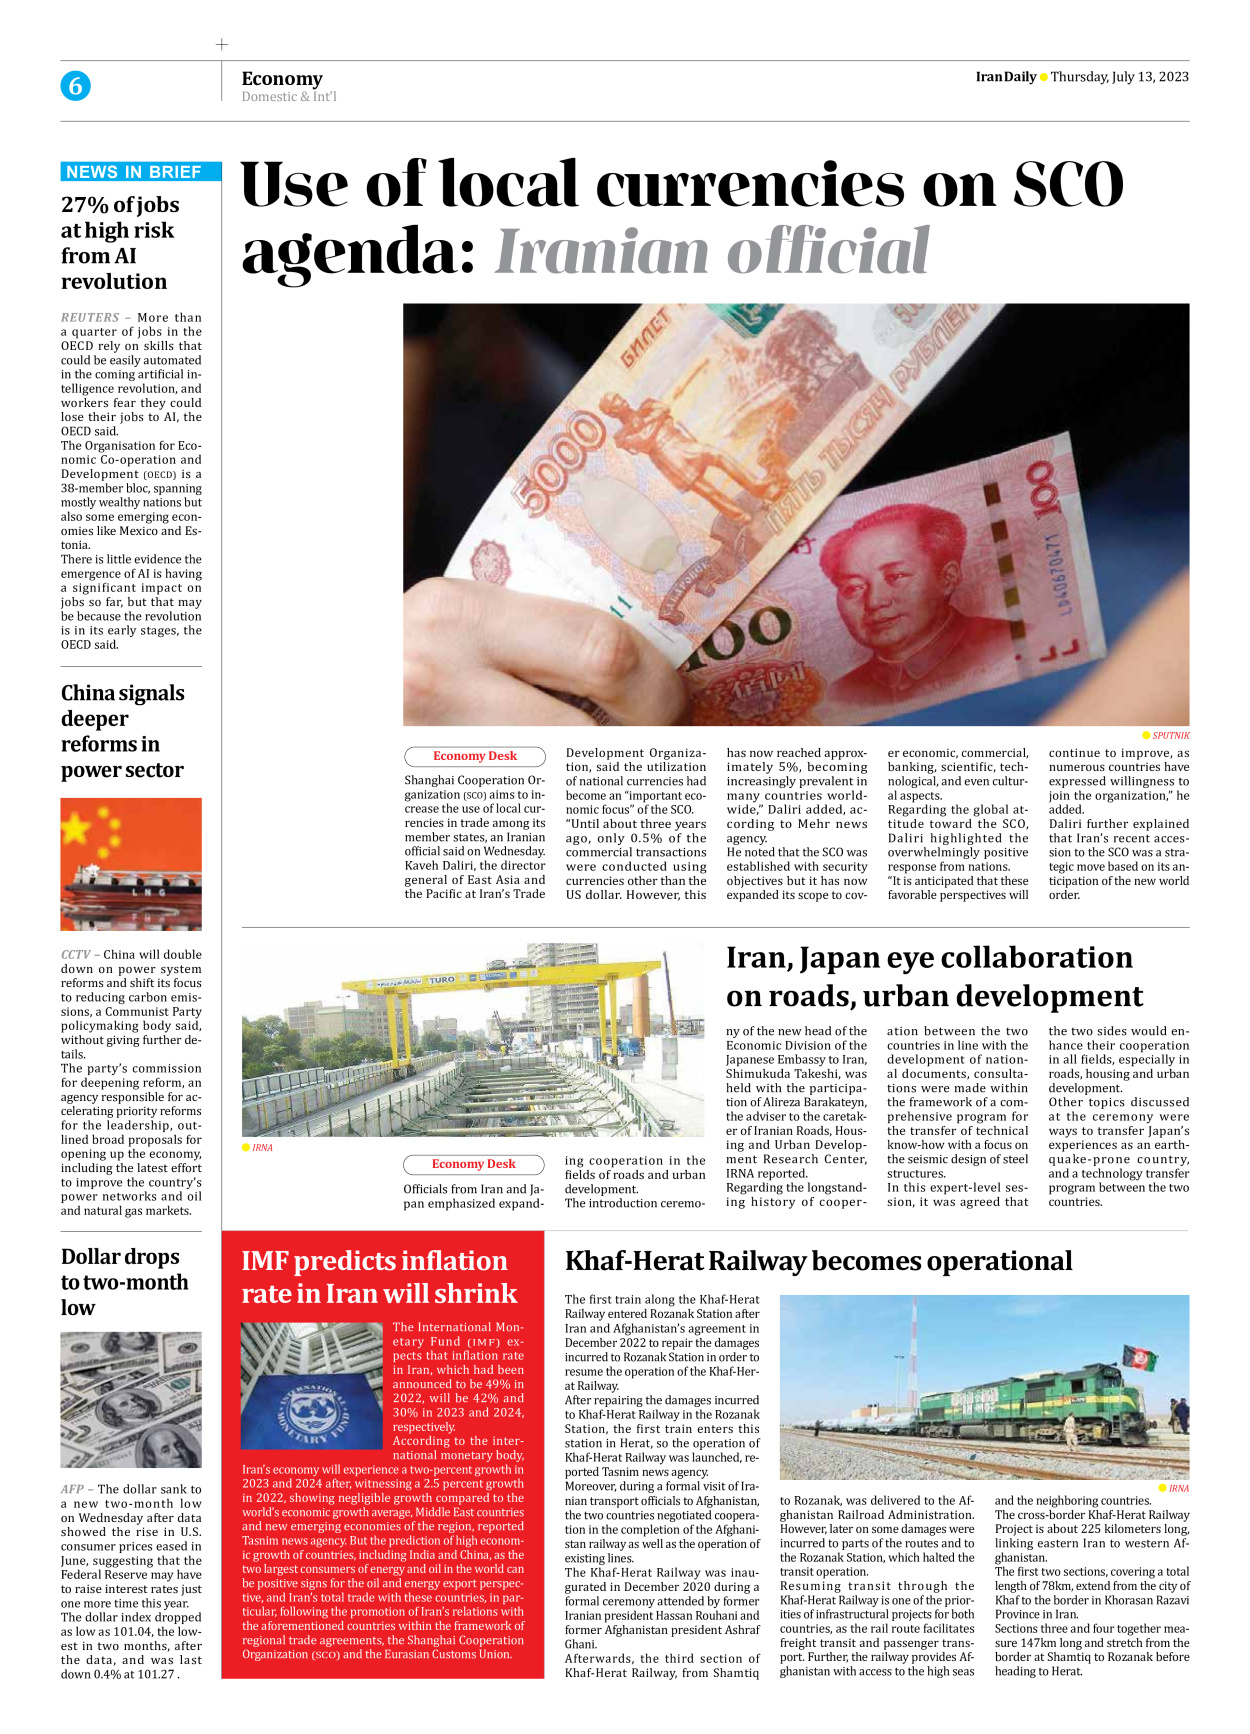 Iran Daily - Number Seven Thousand Three Hundred and Thirty Eight - 13 July 2023 - Page 6